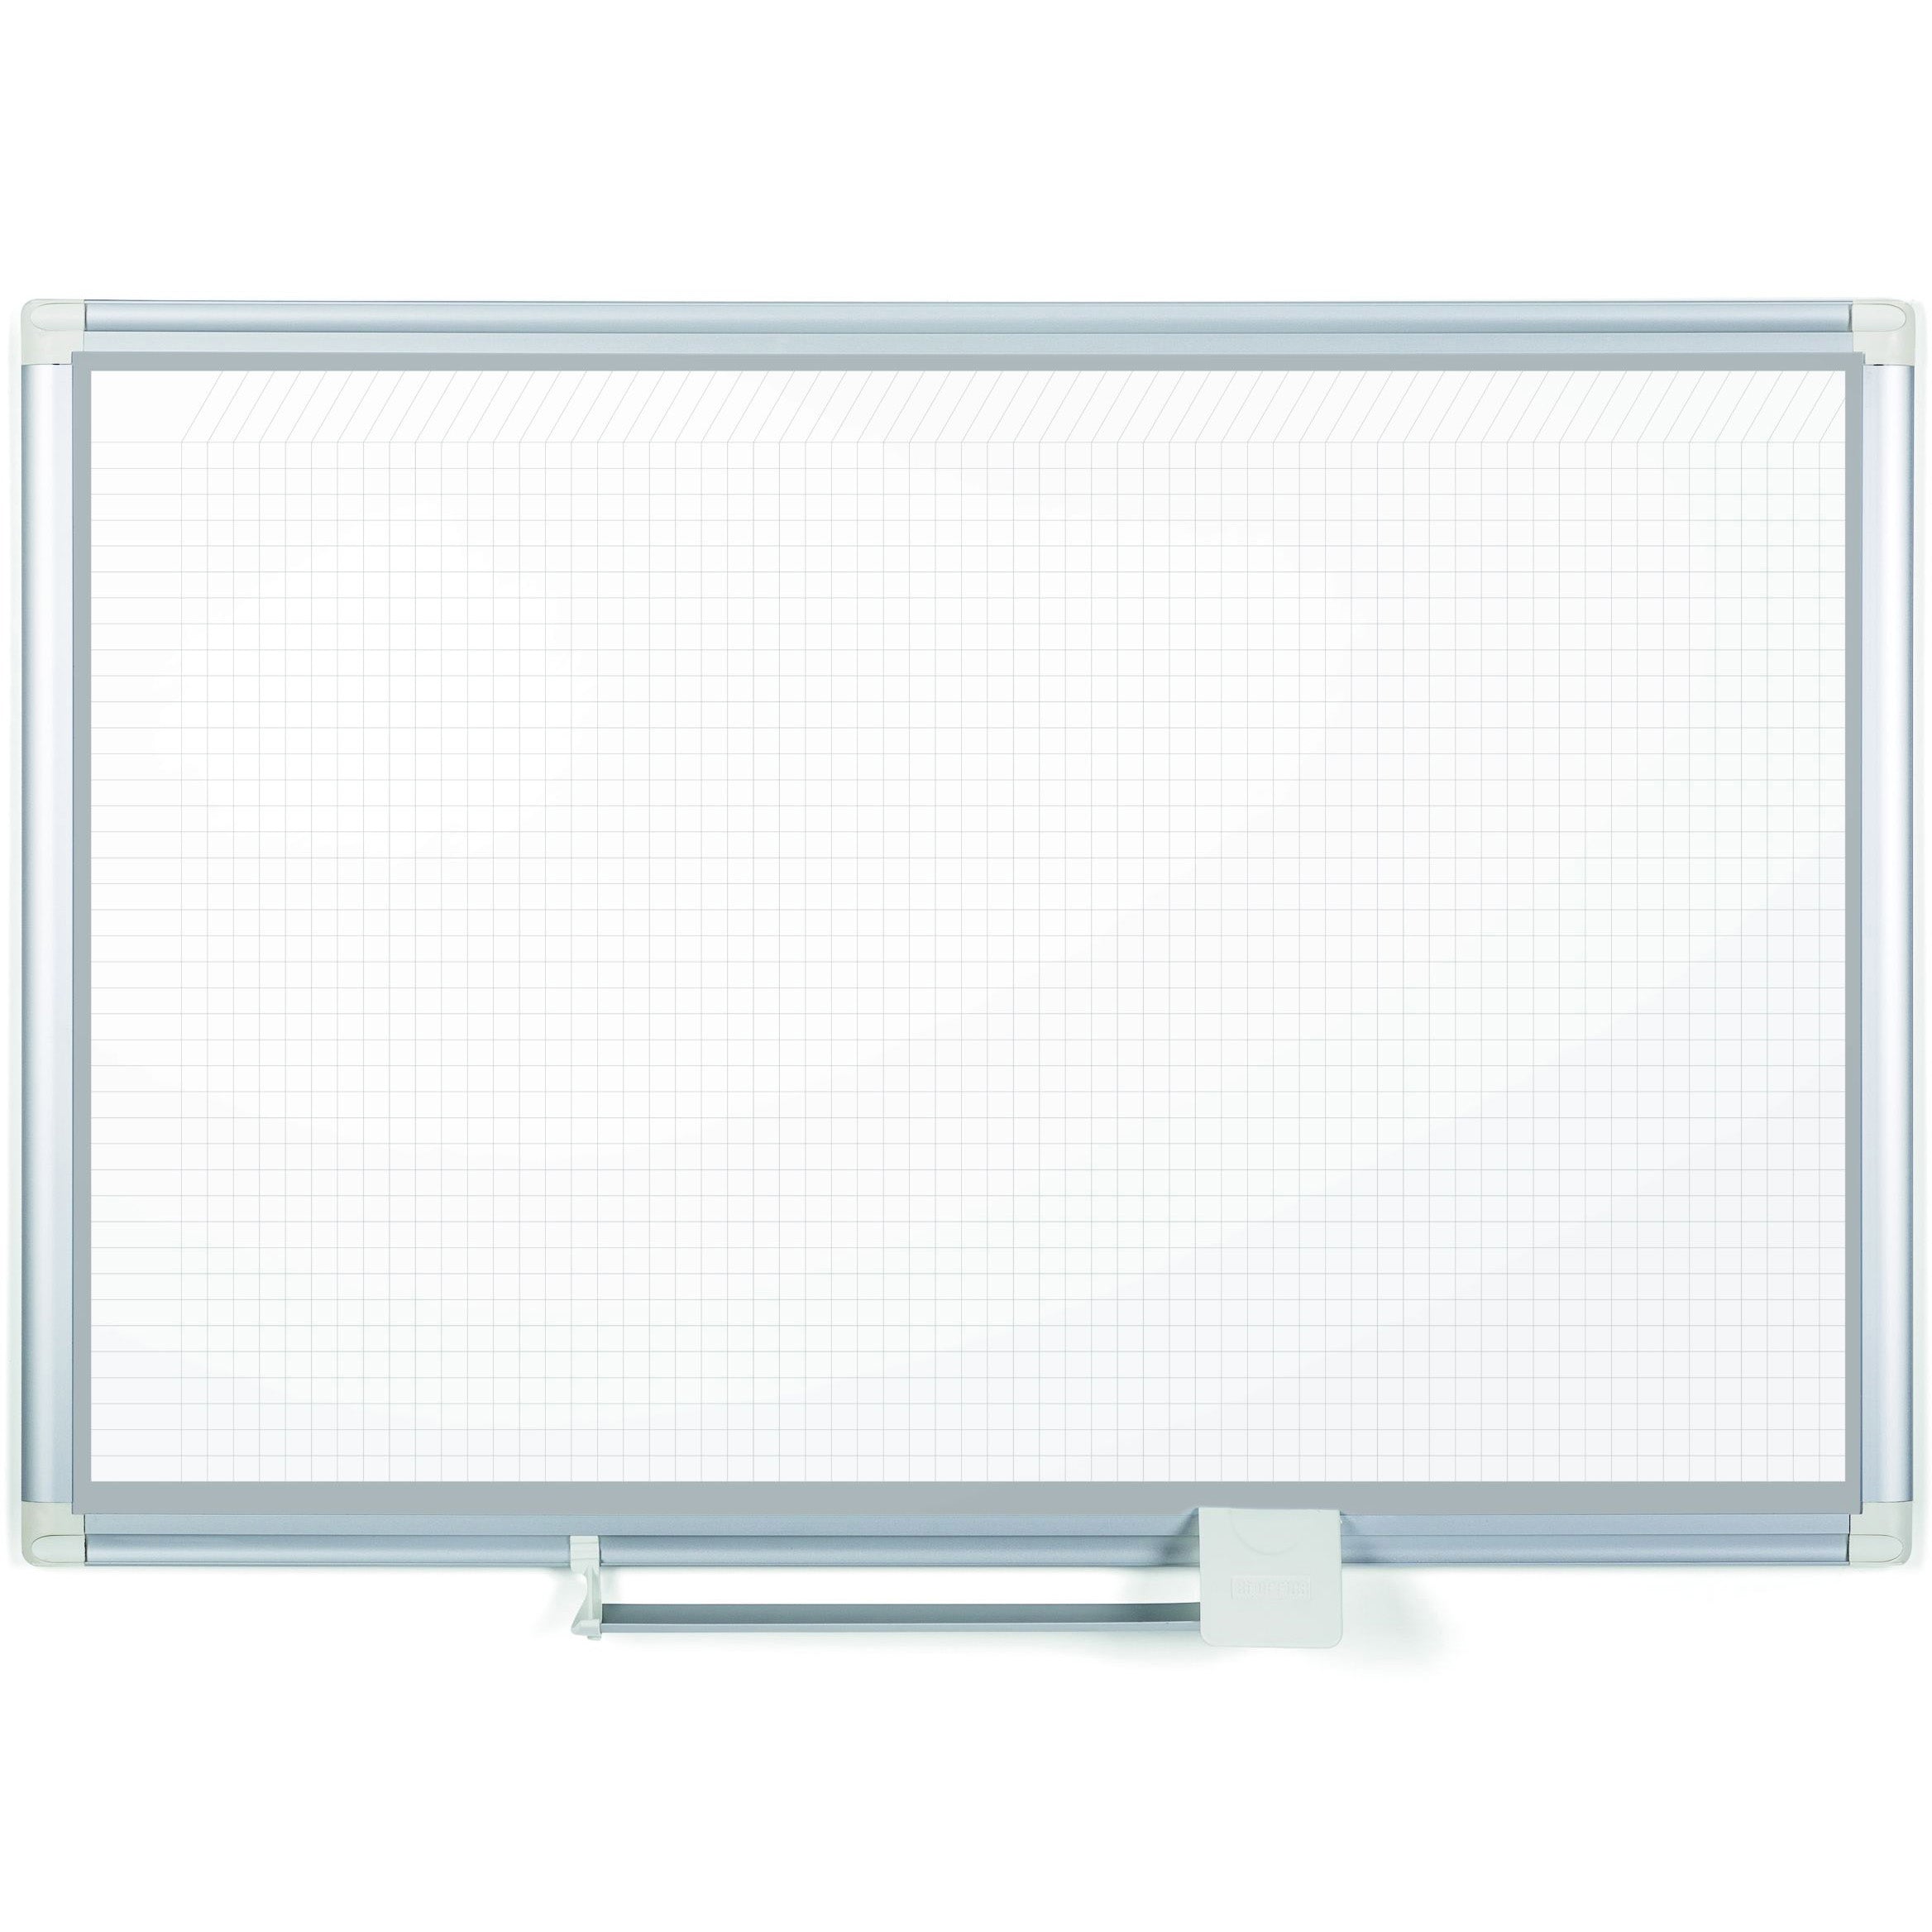 GA03107830A Magentic Dry Erase General Format Planning White Board + Accessory Pack, 1" x 1" Grid, Laquered Steel, 24" x 36", Aluminum Frame by MasterVision